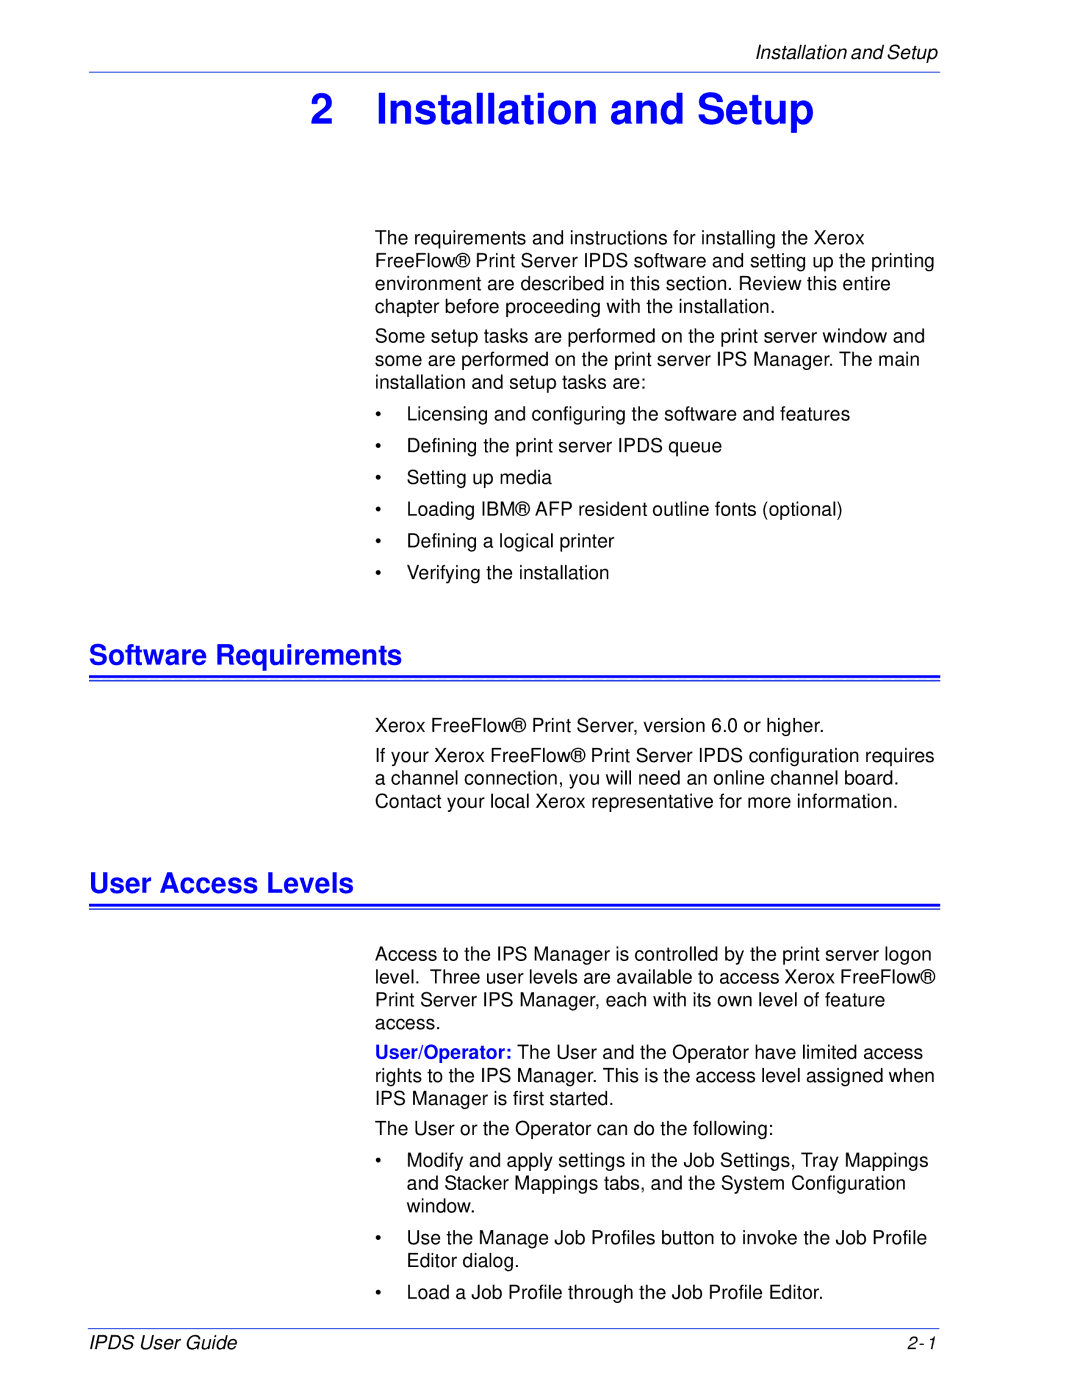 Xerox 701P47301 manual Software Requirements, User Access Levels 